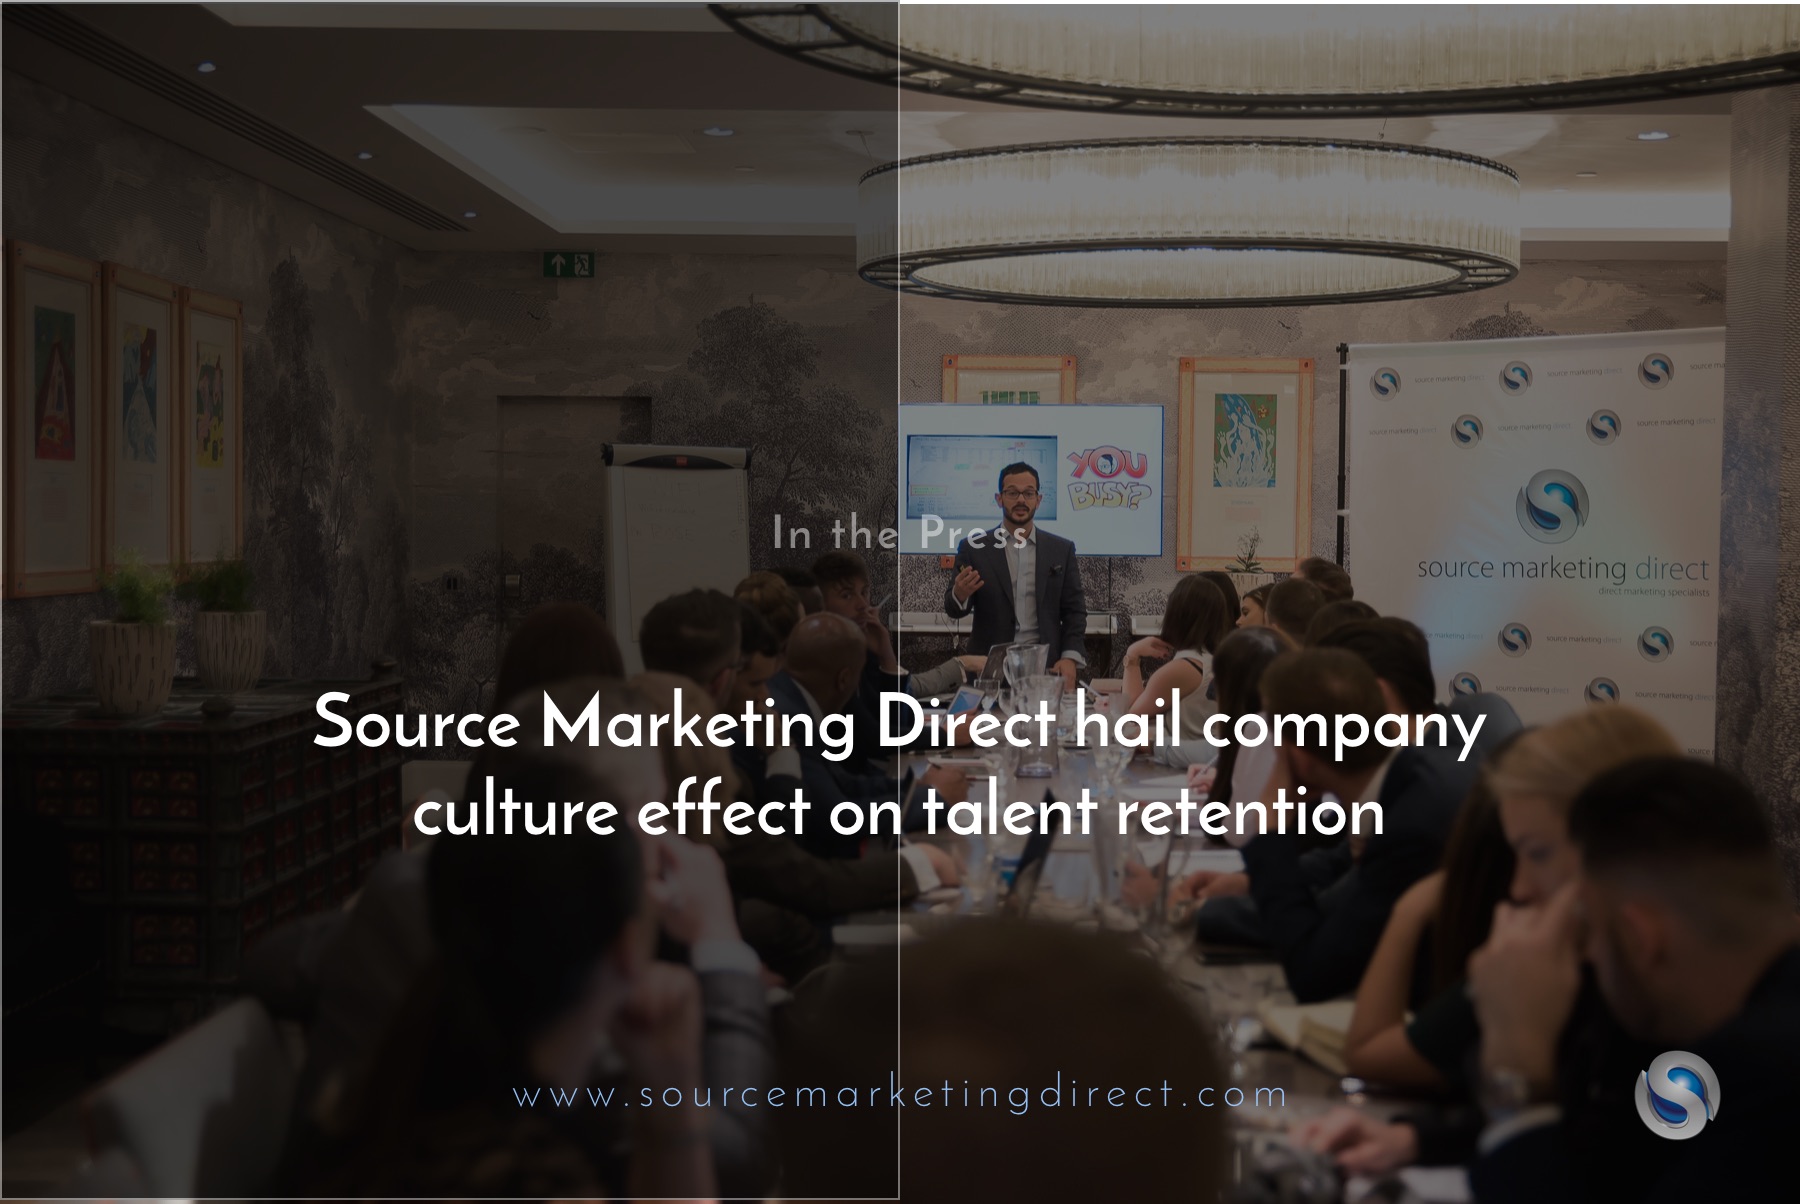 Source Marketing Direct hail company culture effect on talent retention